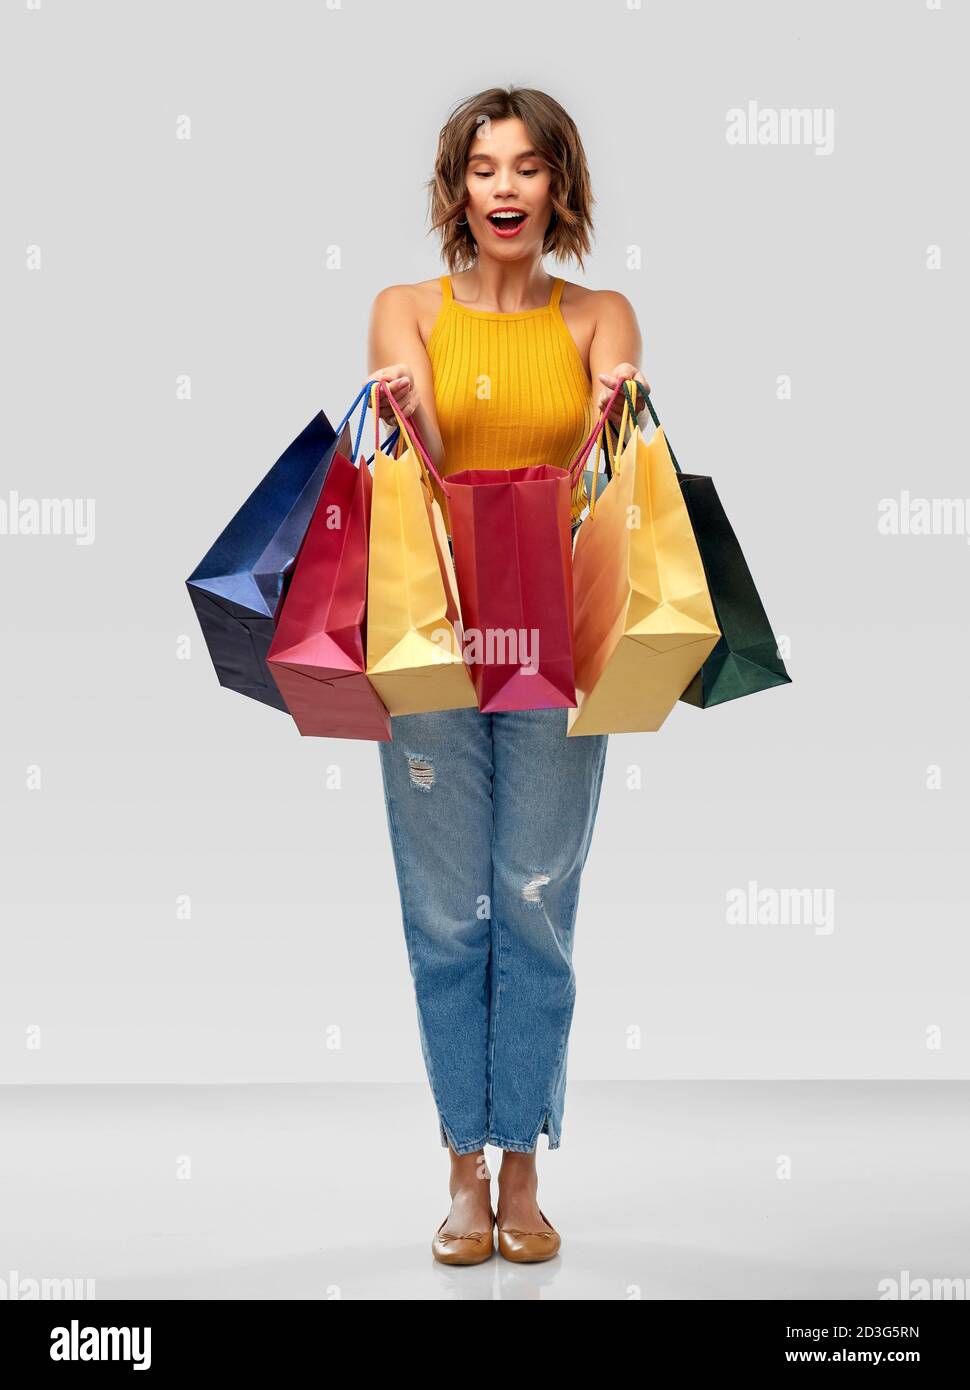 happy smiling young woman with shopping bags Stock Photo